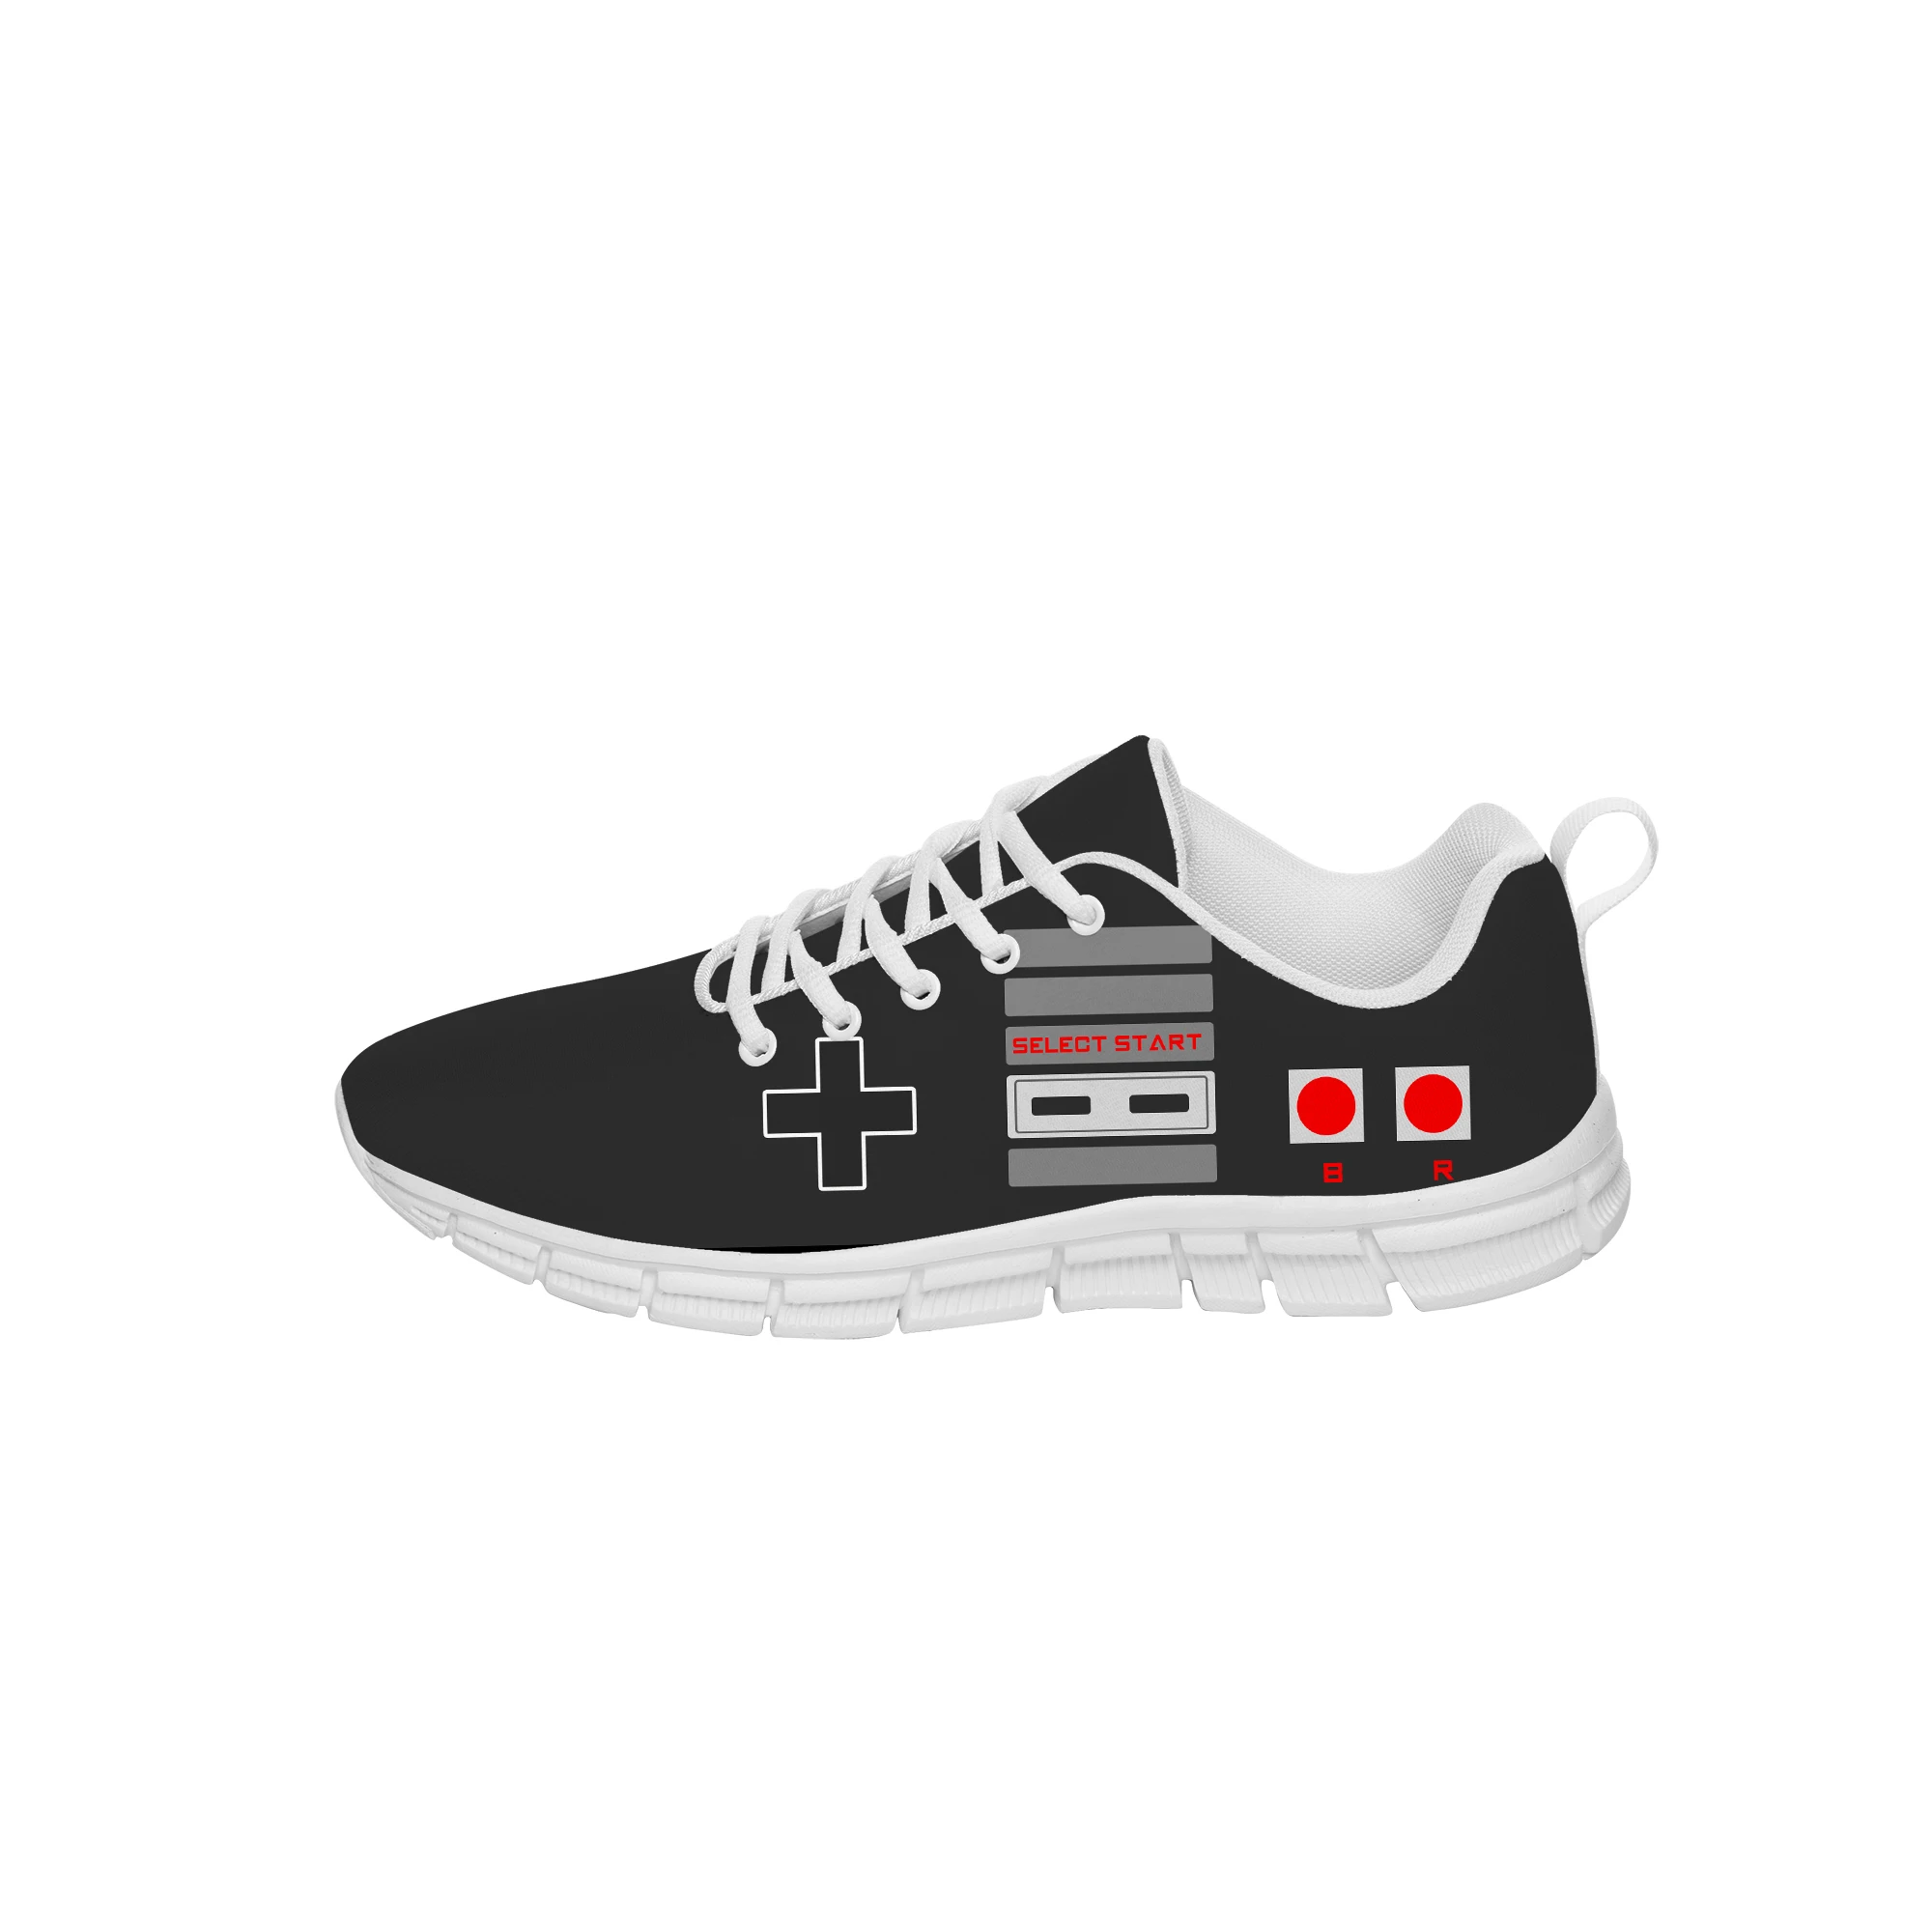 Nintendo Nes Controller Sneakers Mens Womens Teenager Casual Cloth Shoes Canvas Running Shoes 3D Print Lightweight shoe anime my hero academia bakugou katsuki white sneakers mens womens teenager casual cloth shoes canvas 3d print lightweight shoe